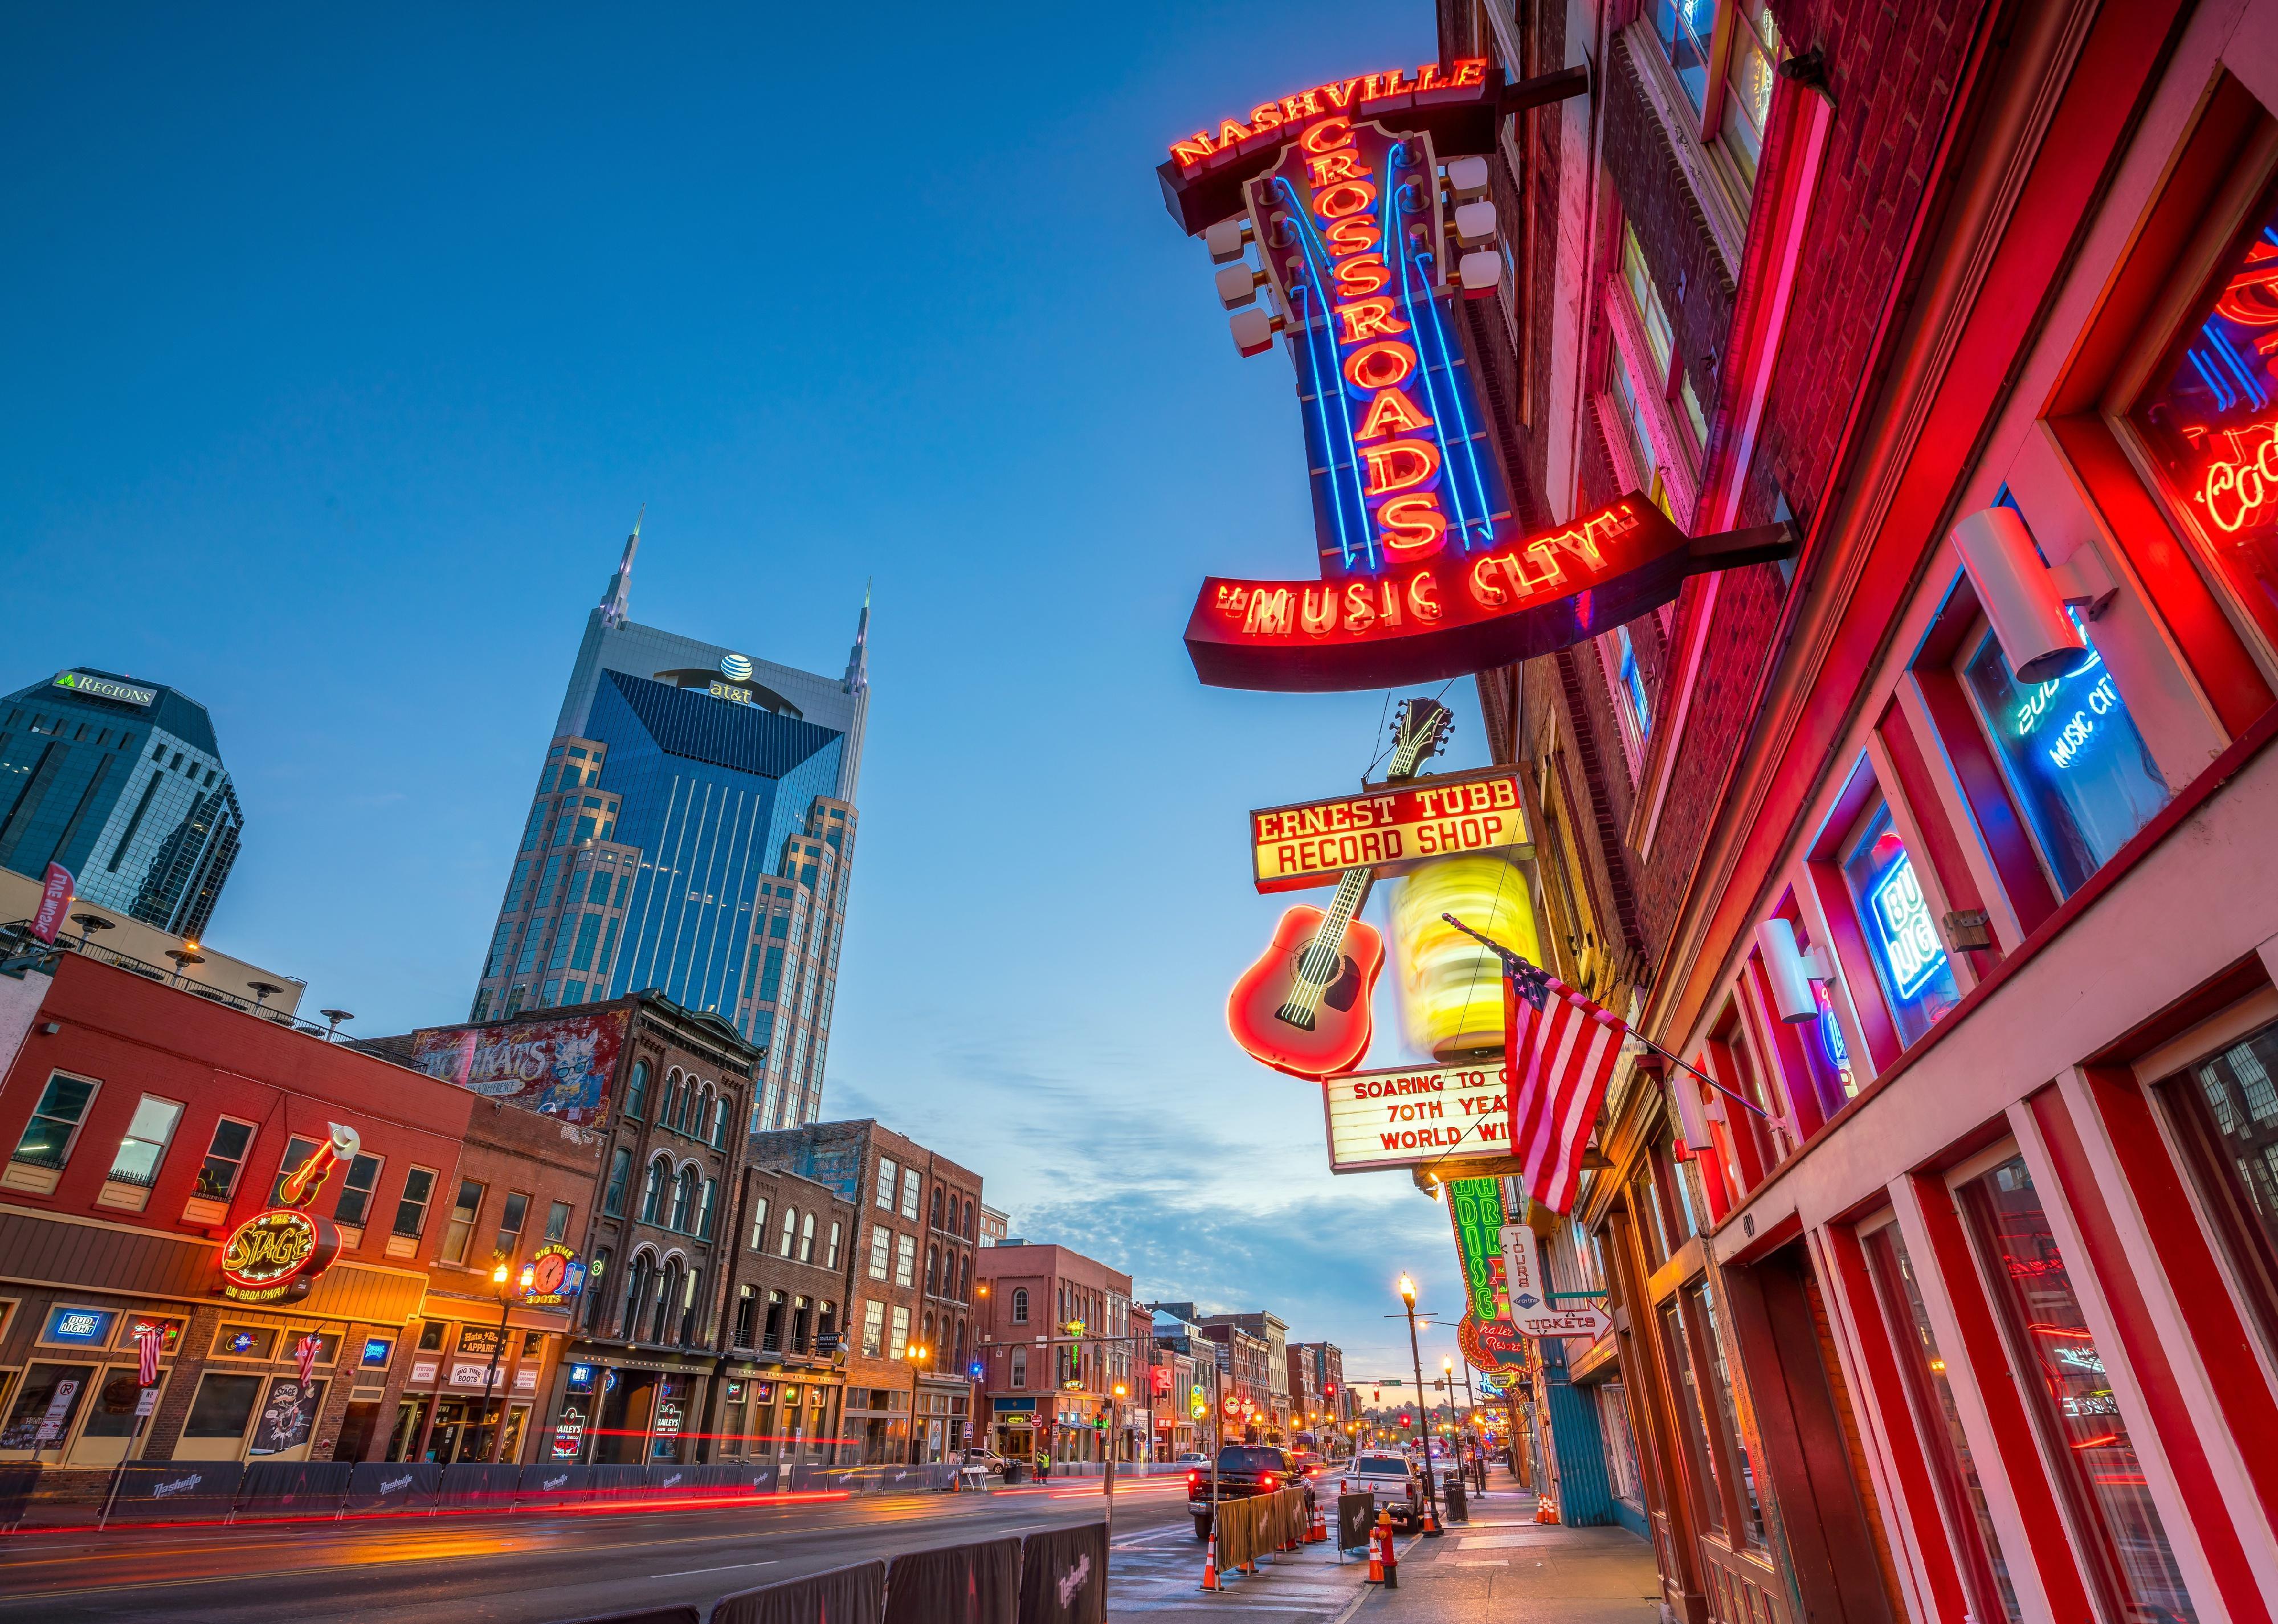 Neon signs light up the historic Broadway music joints in Nashville.